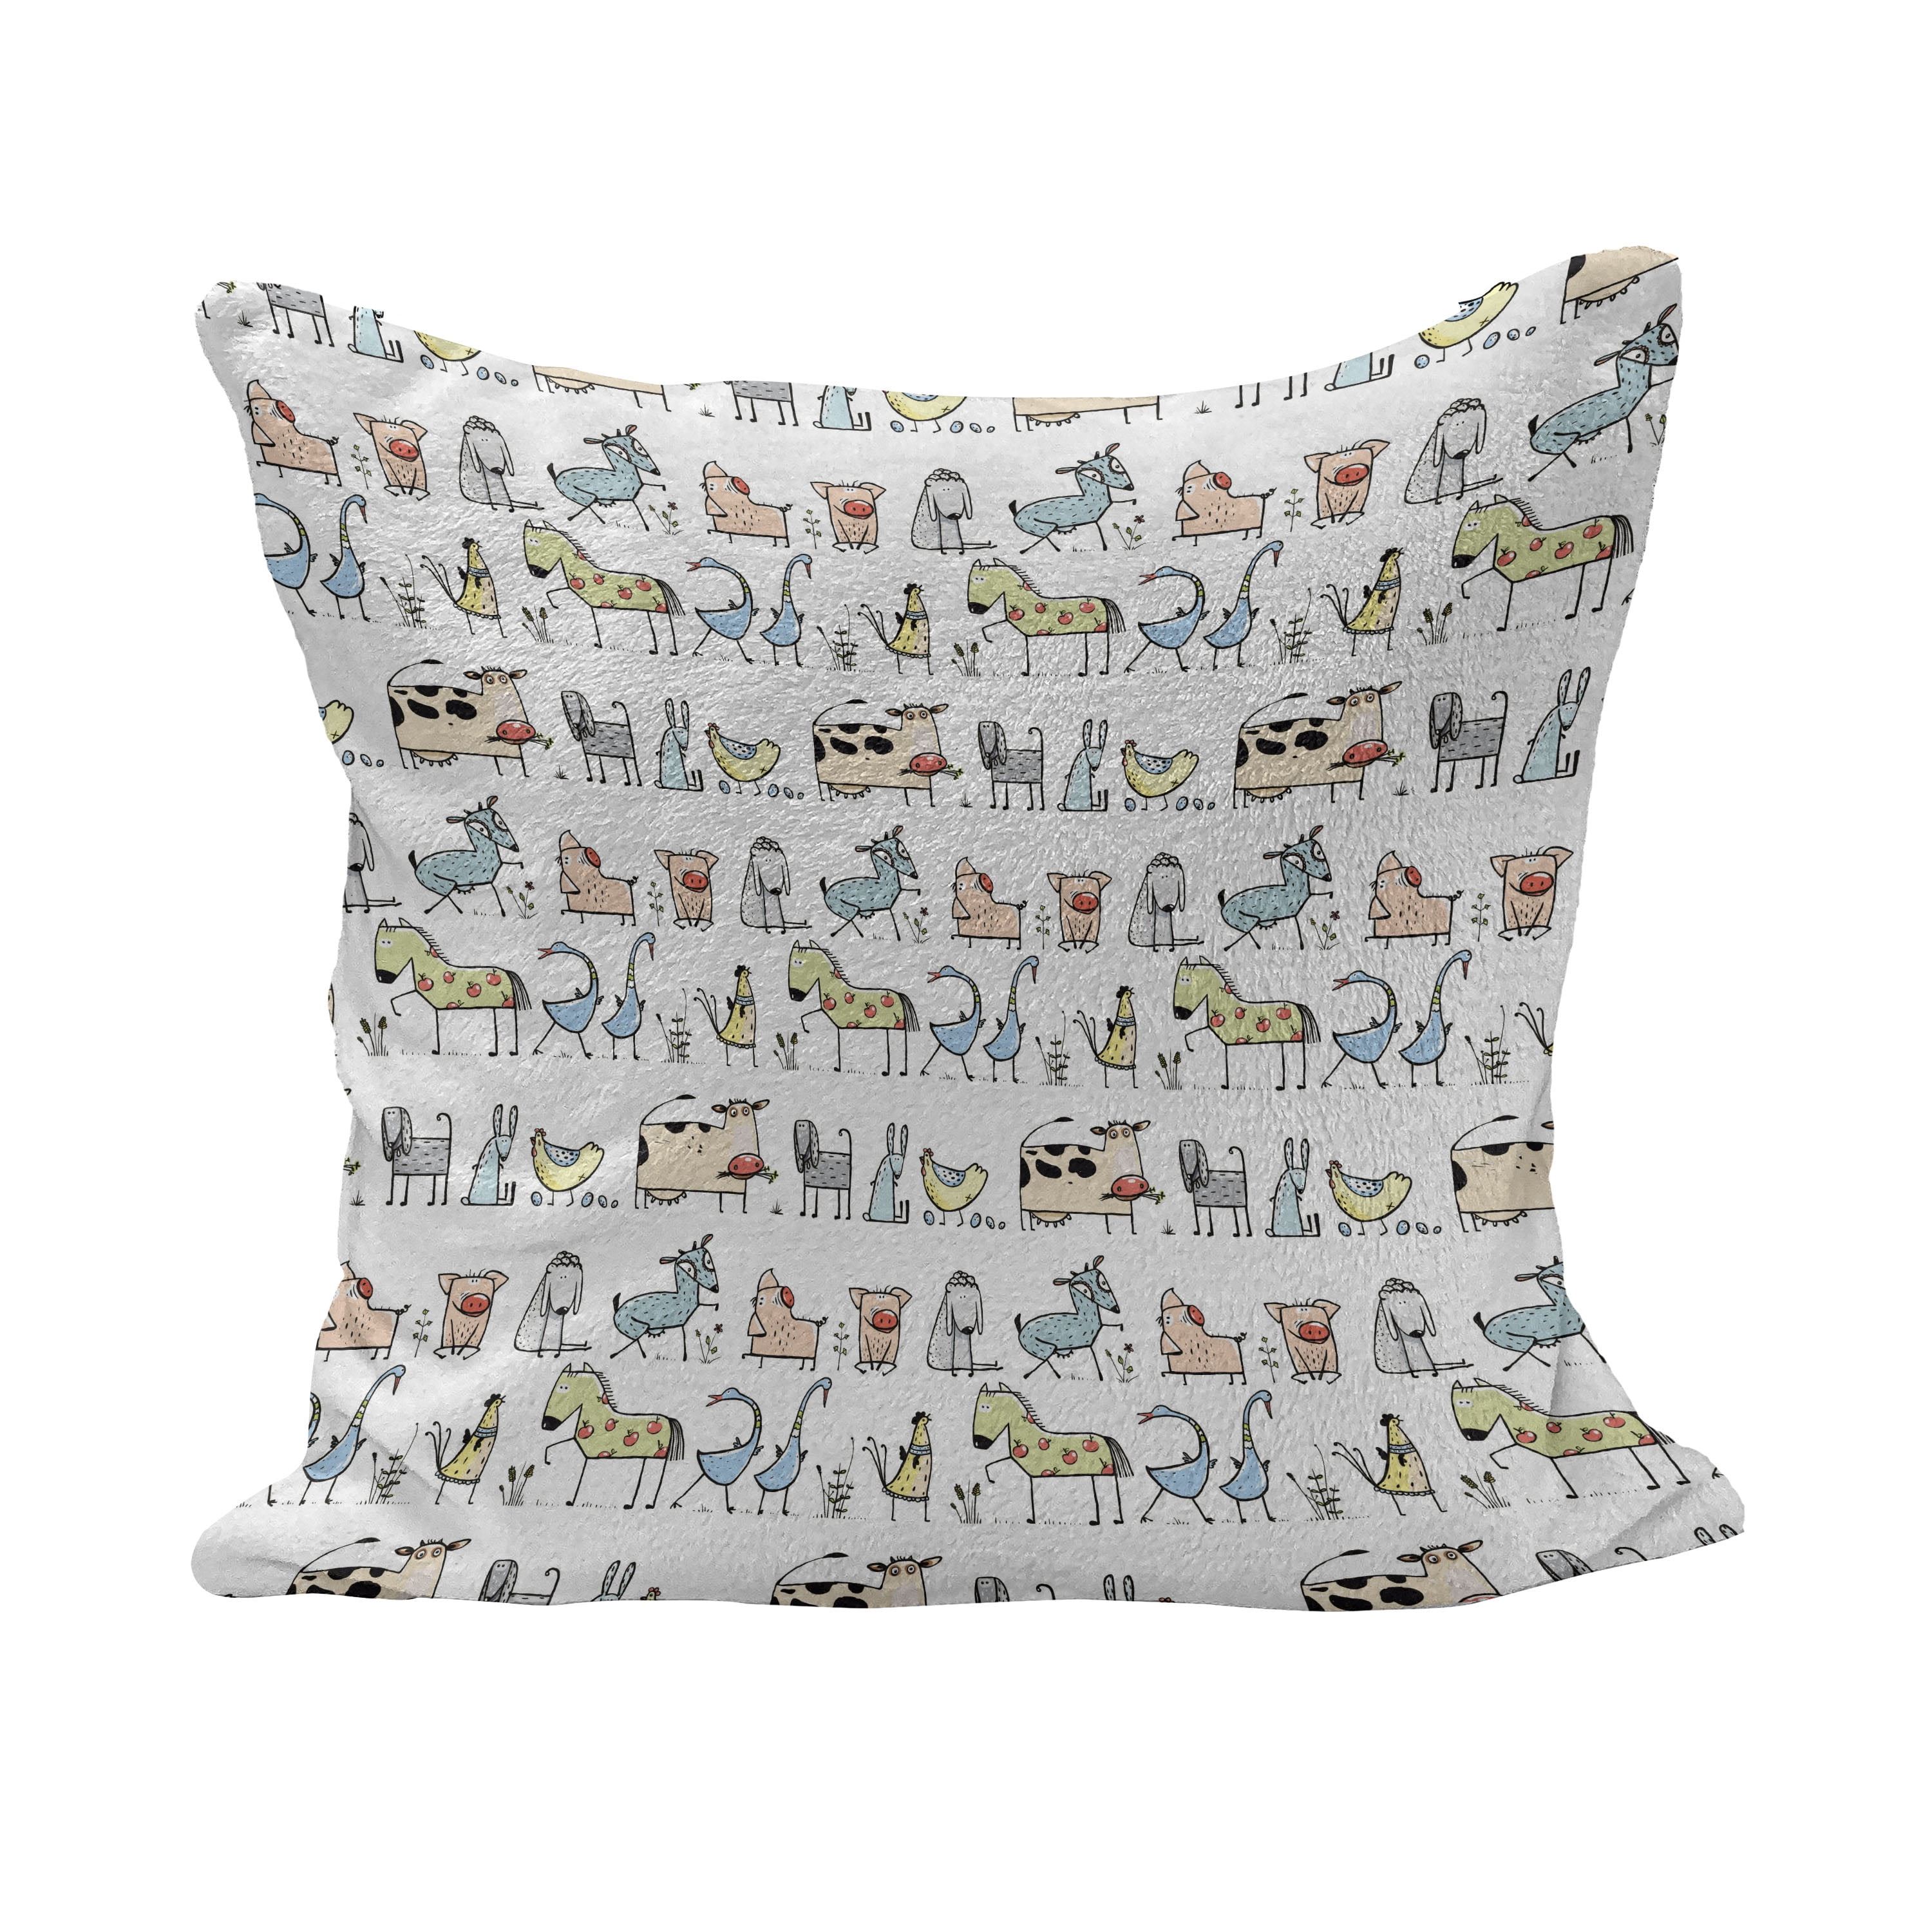 Retro Fluffy Throw Pillow Cushion Cover, Cartoon Village of Domestic Animals  Goat Goose Sheep Funny Patterns, Decorative Square Accent Pillow Case, 20